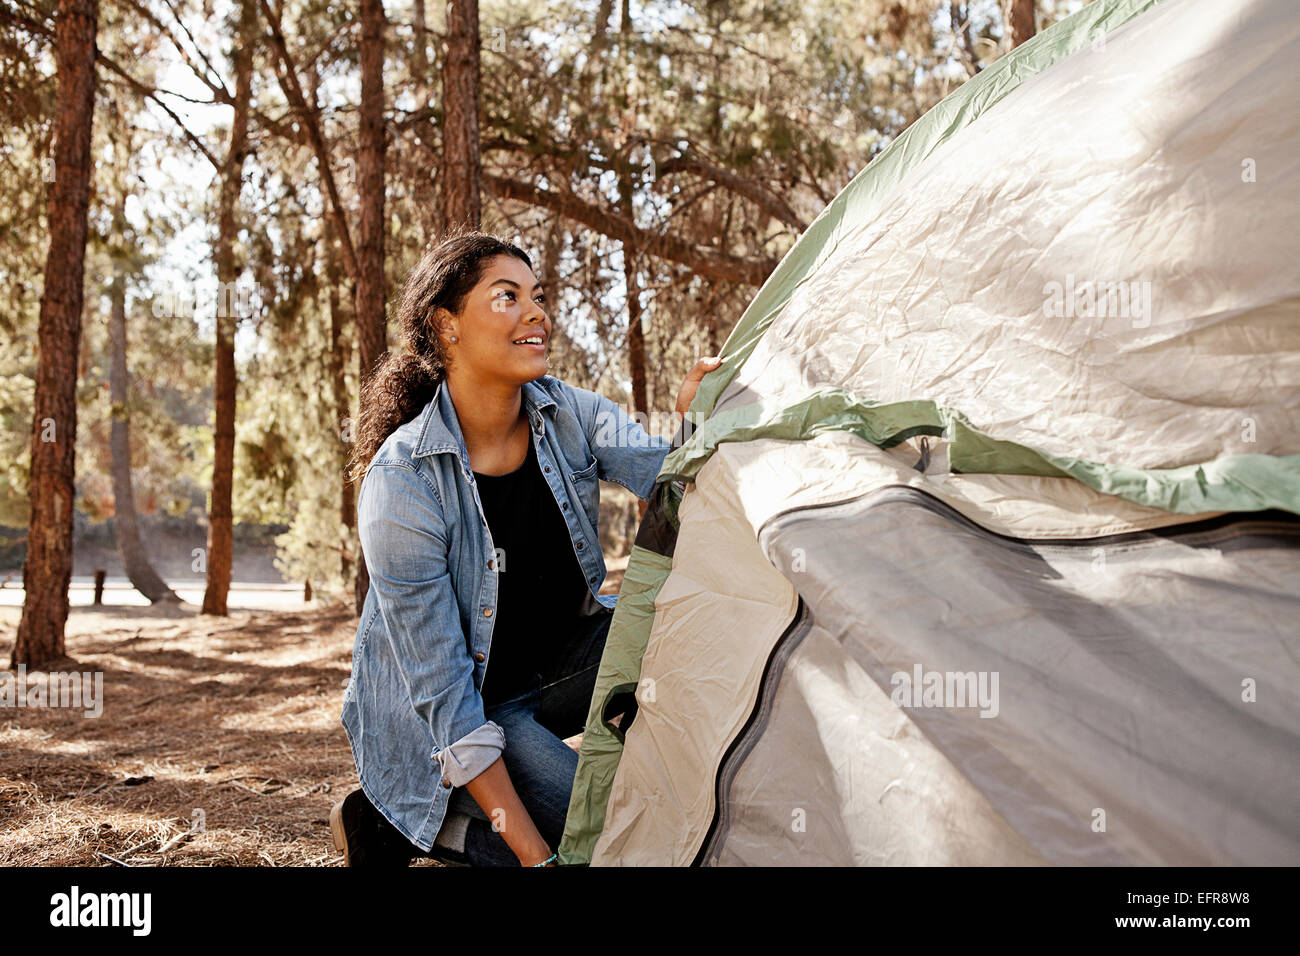 Young woman in forest putting up tent Stock Photo